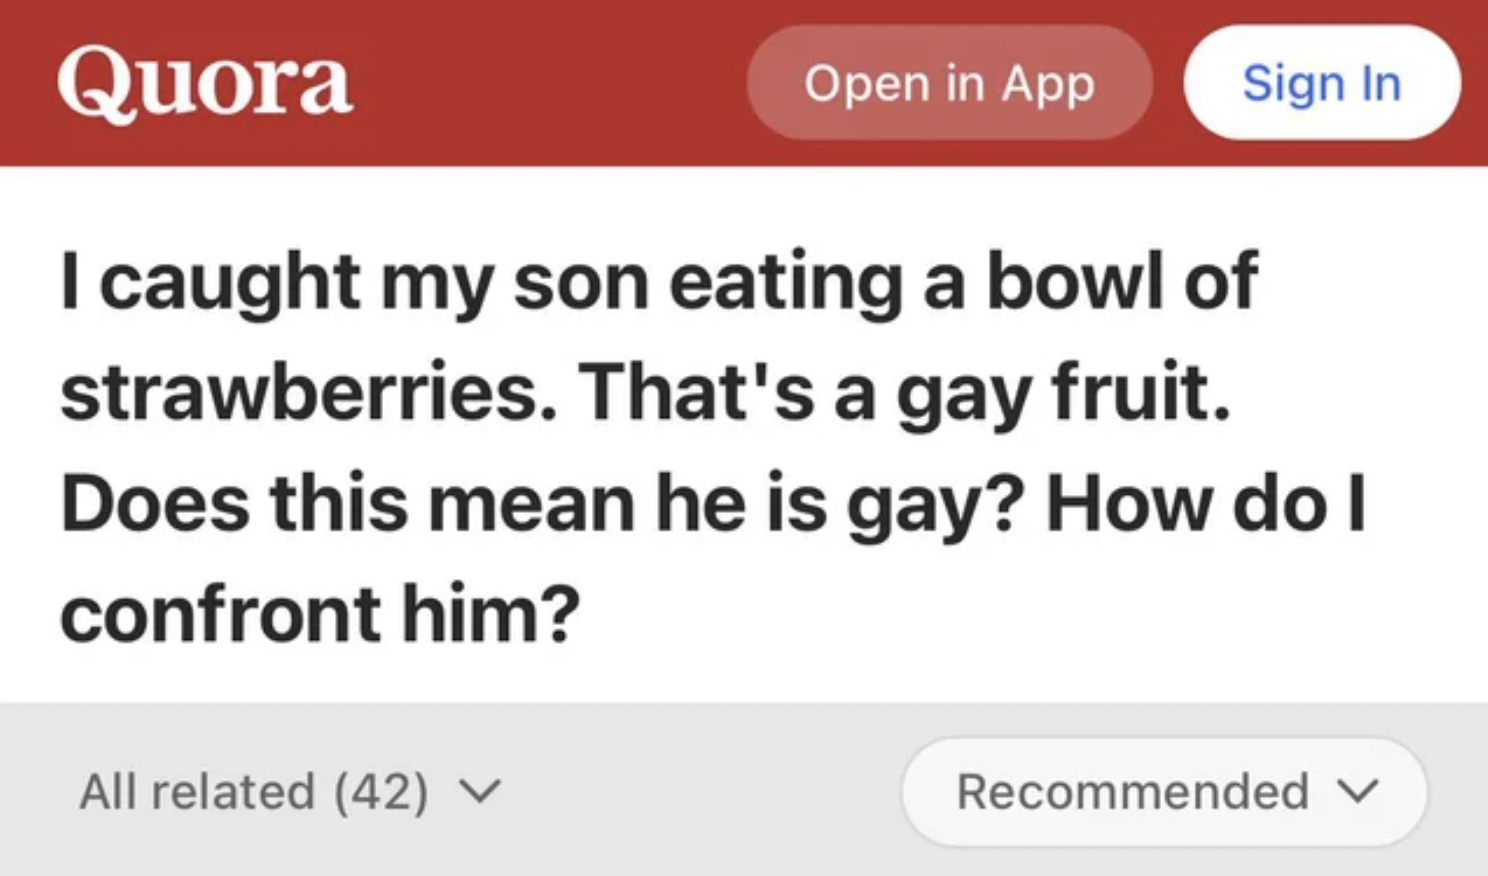 Funny facepalms - does england a european country speak english - Quora I caught my son eating a bowl of strawberries. That's a gay fruit. Does this mean he is gay? How do I confront him? All related 42 Open in App Sign In Recommended V